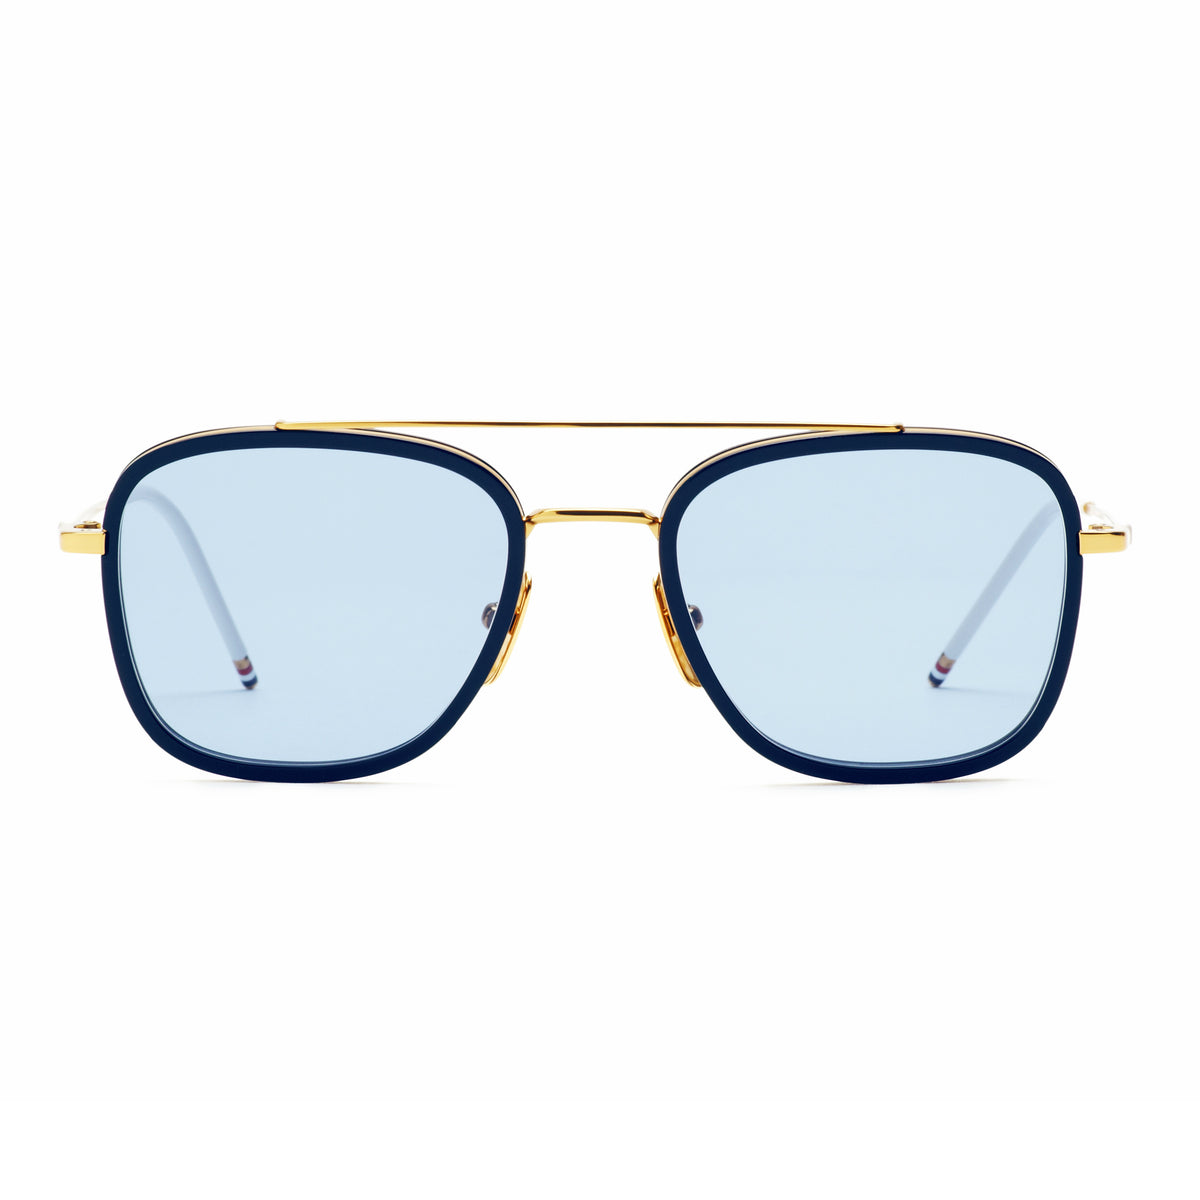 UES-800A Navy 18K Gold Sunglasses